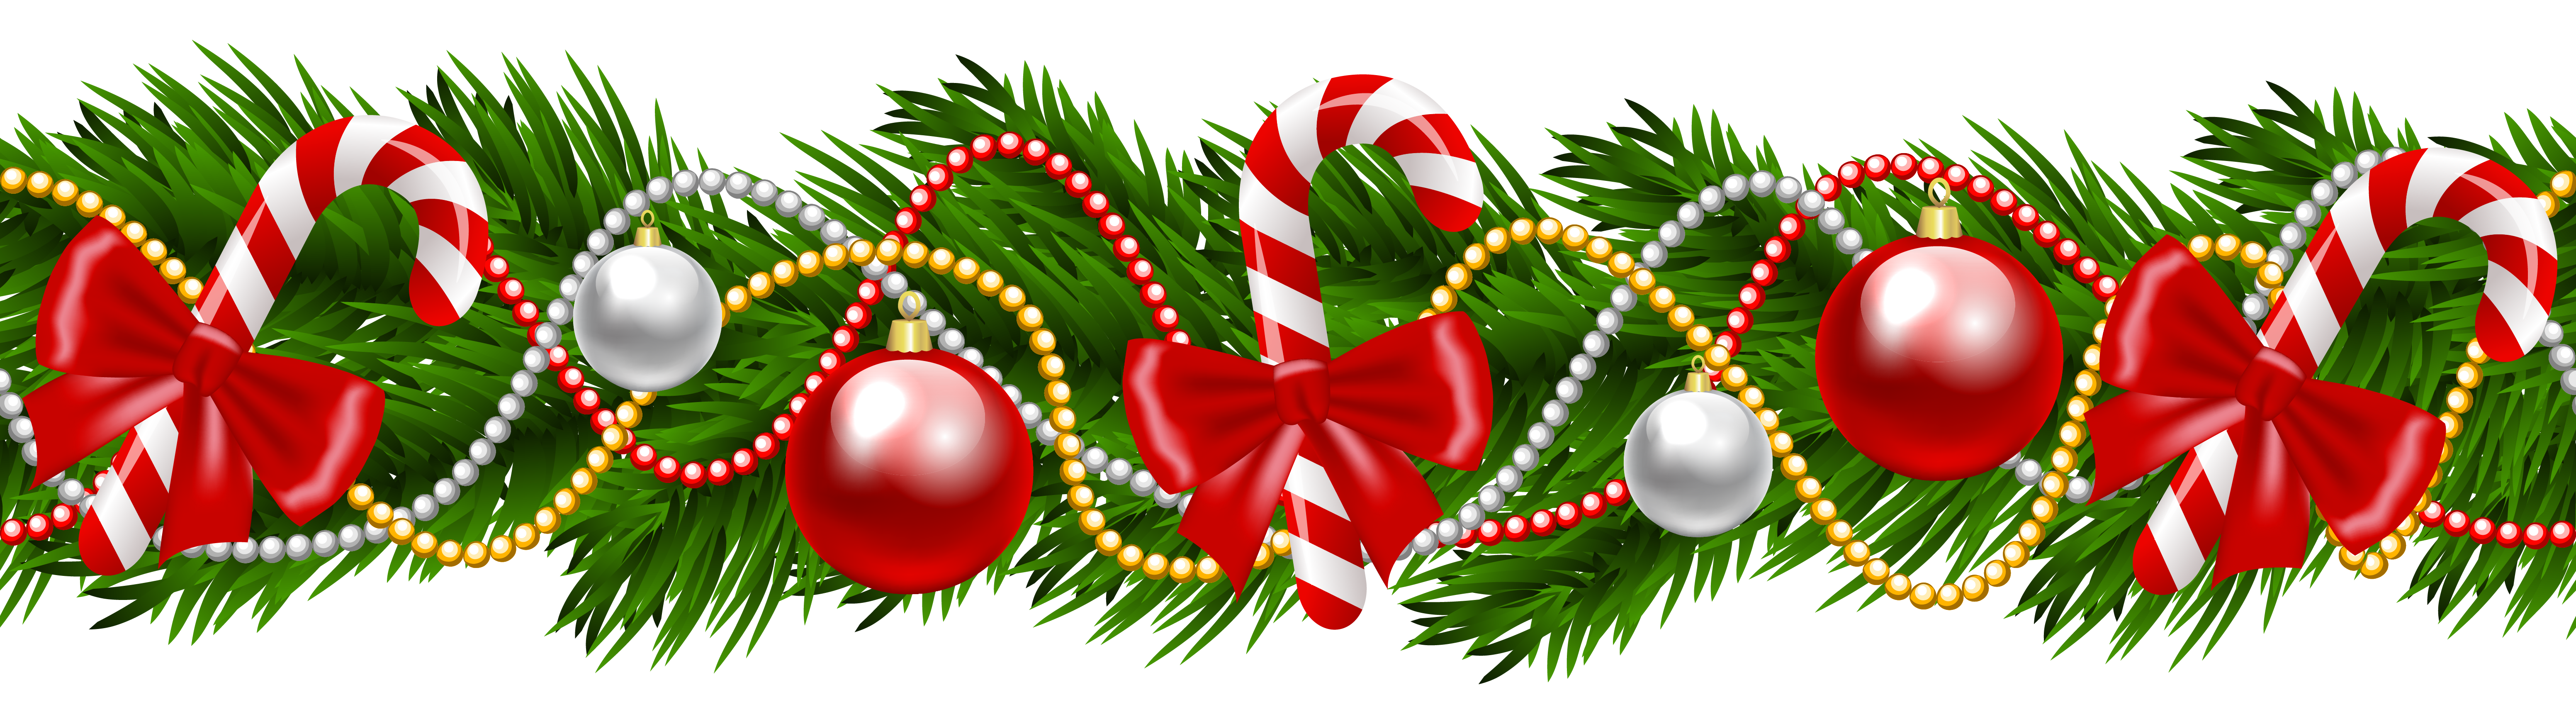 Christmas garland clip art free clipart image image  Clip Art Library